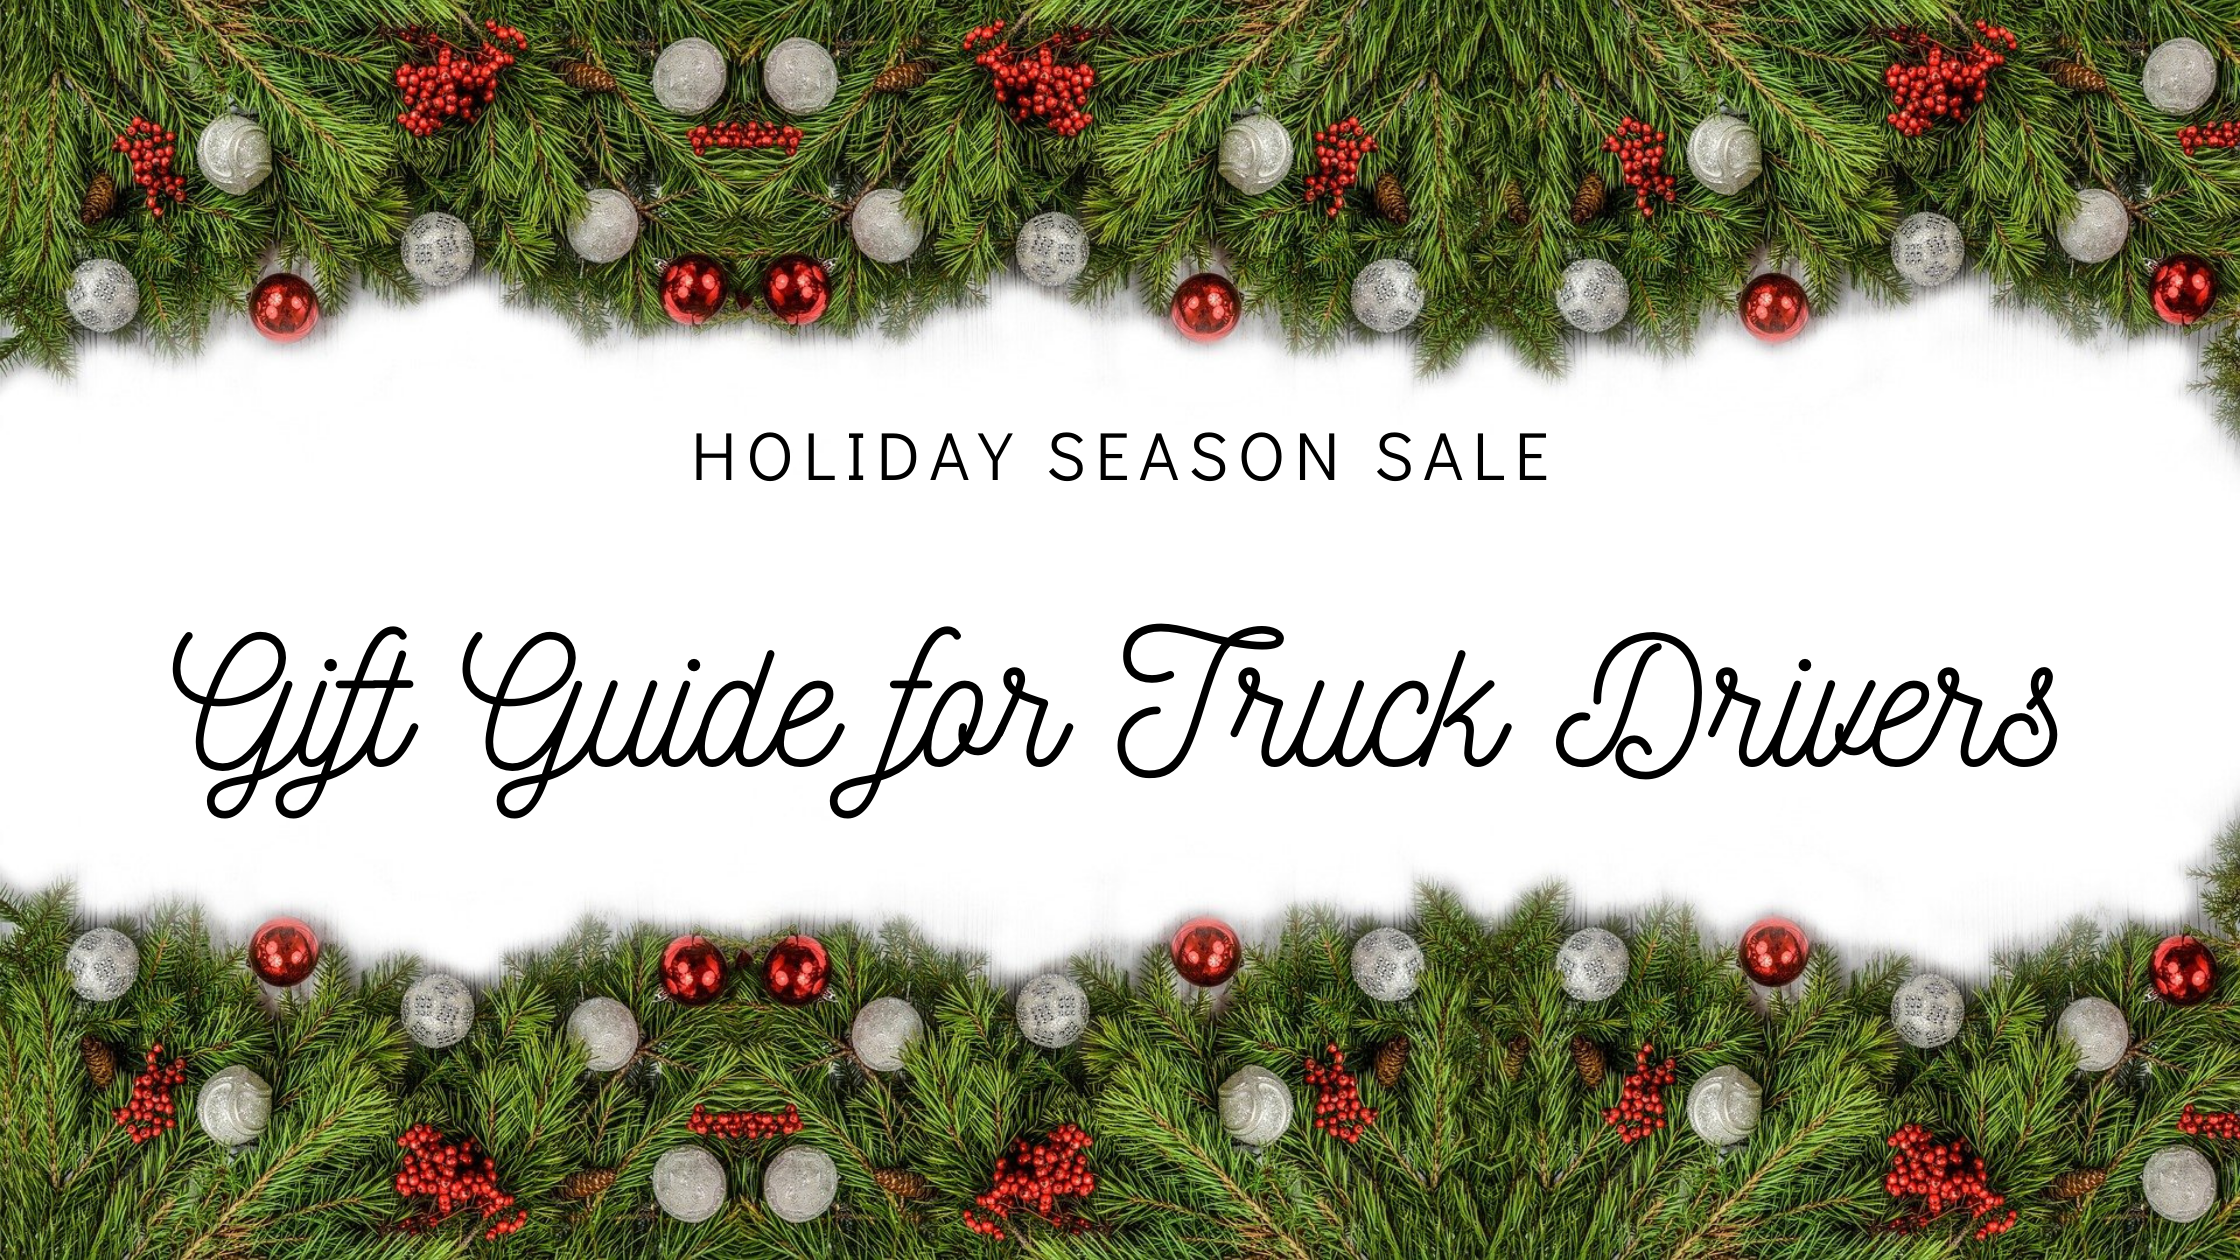 Gift Guide for Truck Drivers (1)